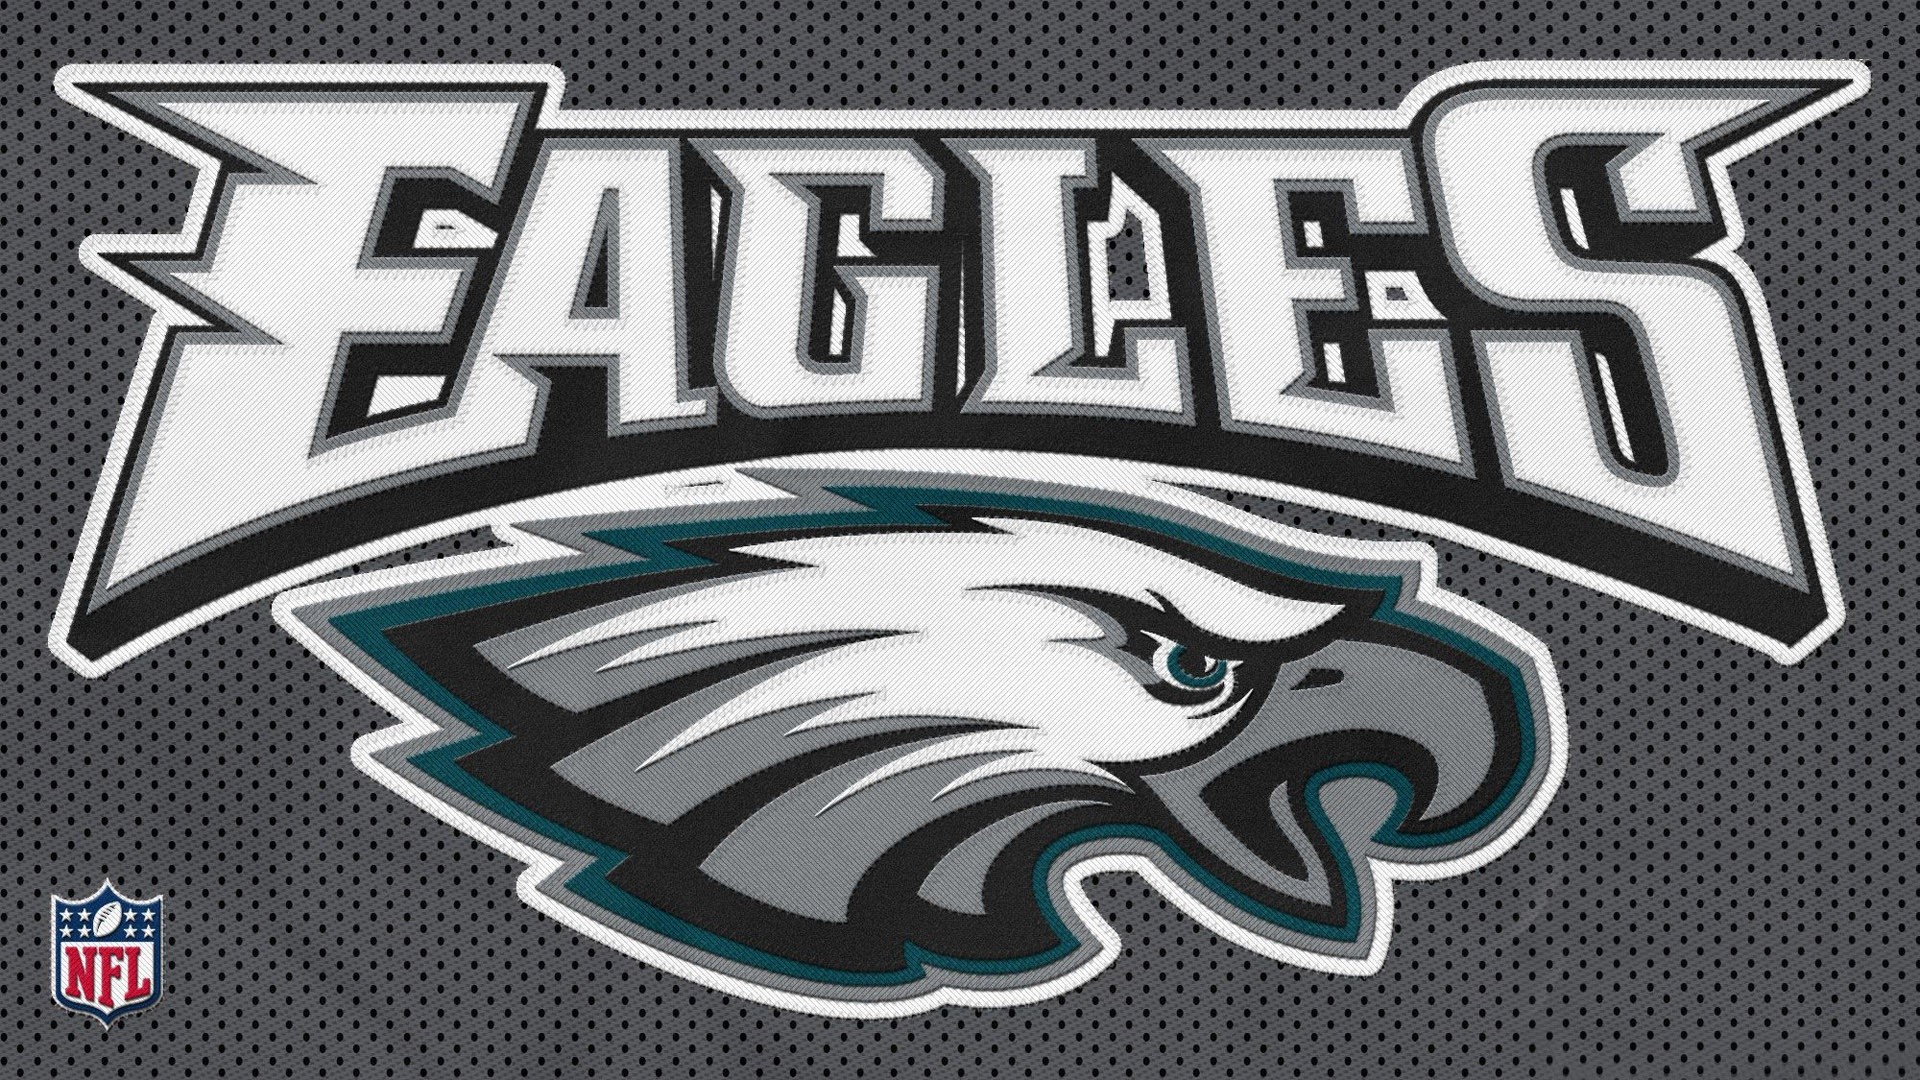 HD Philadelphia Eagles Wallpapers With Resolution 1920X1080 pixel. You can make this wallpaper for your Mac or Windows Desktop Background, iPhone, Android or Tablet and another Smartphone device for free